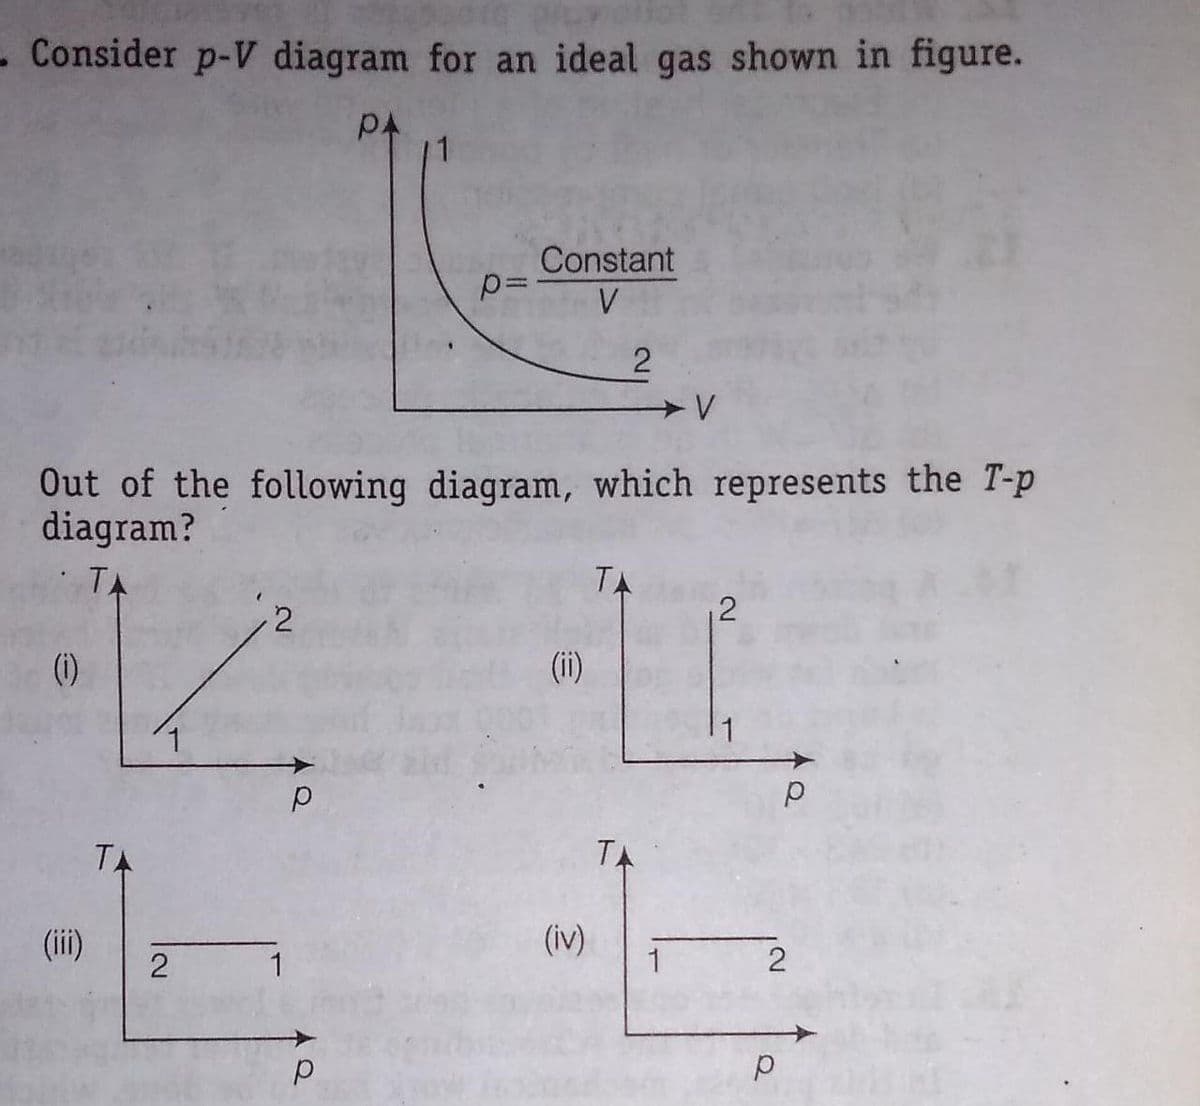 - Consider p-V diagram for an ideal gas shown in figure.
Constant
V
Out of the following diagram, which represents the T-p
diagram?
TA
TA
,2
(0)
(ii)
TA
TA
(ii)
(iv)
1
2.
